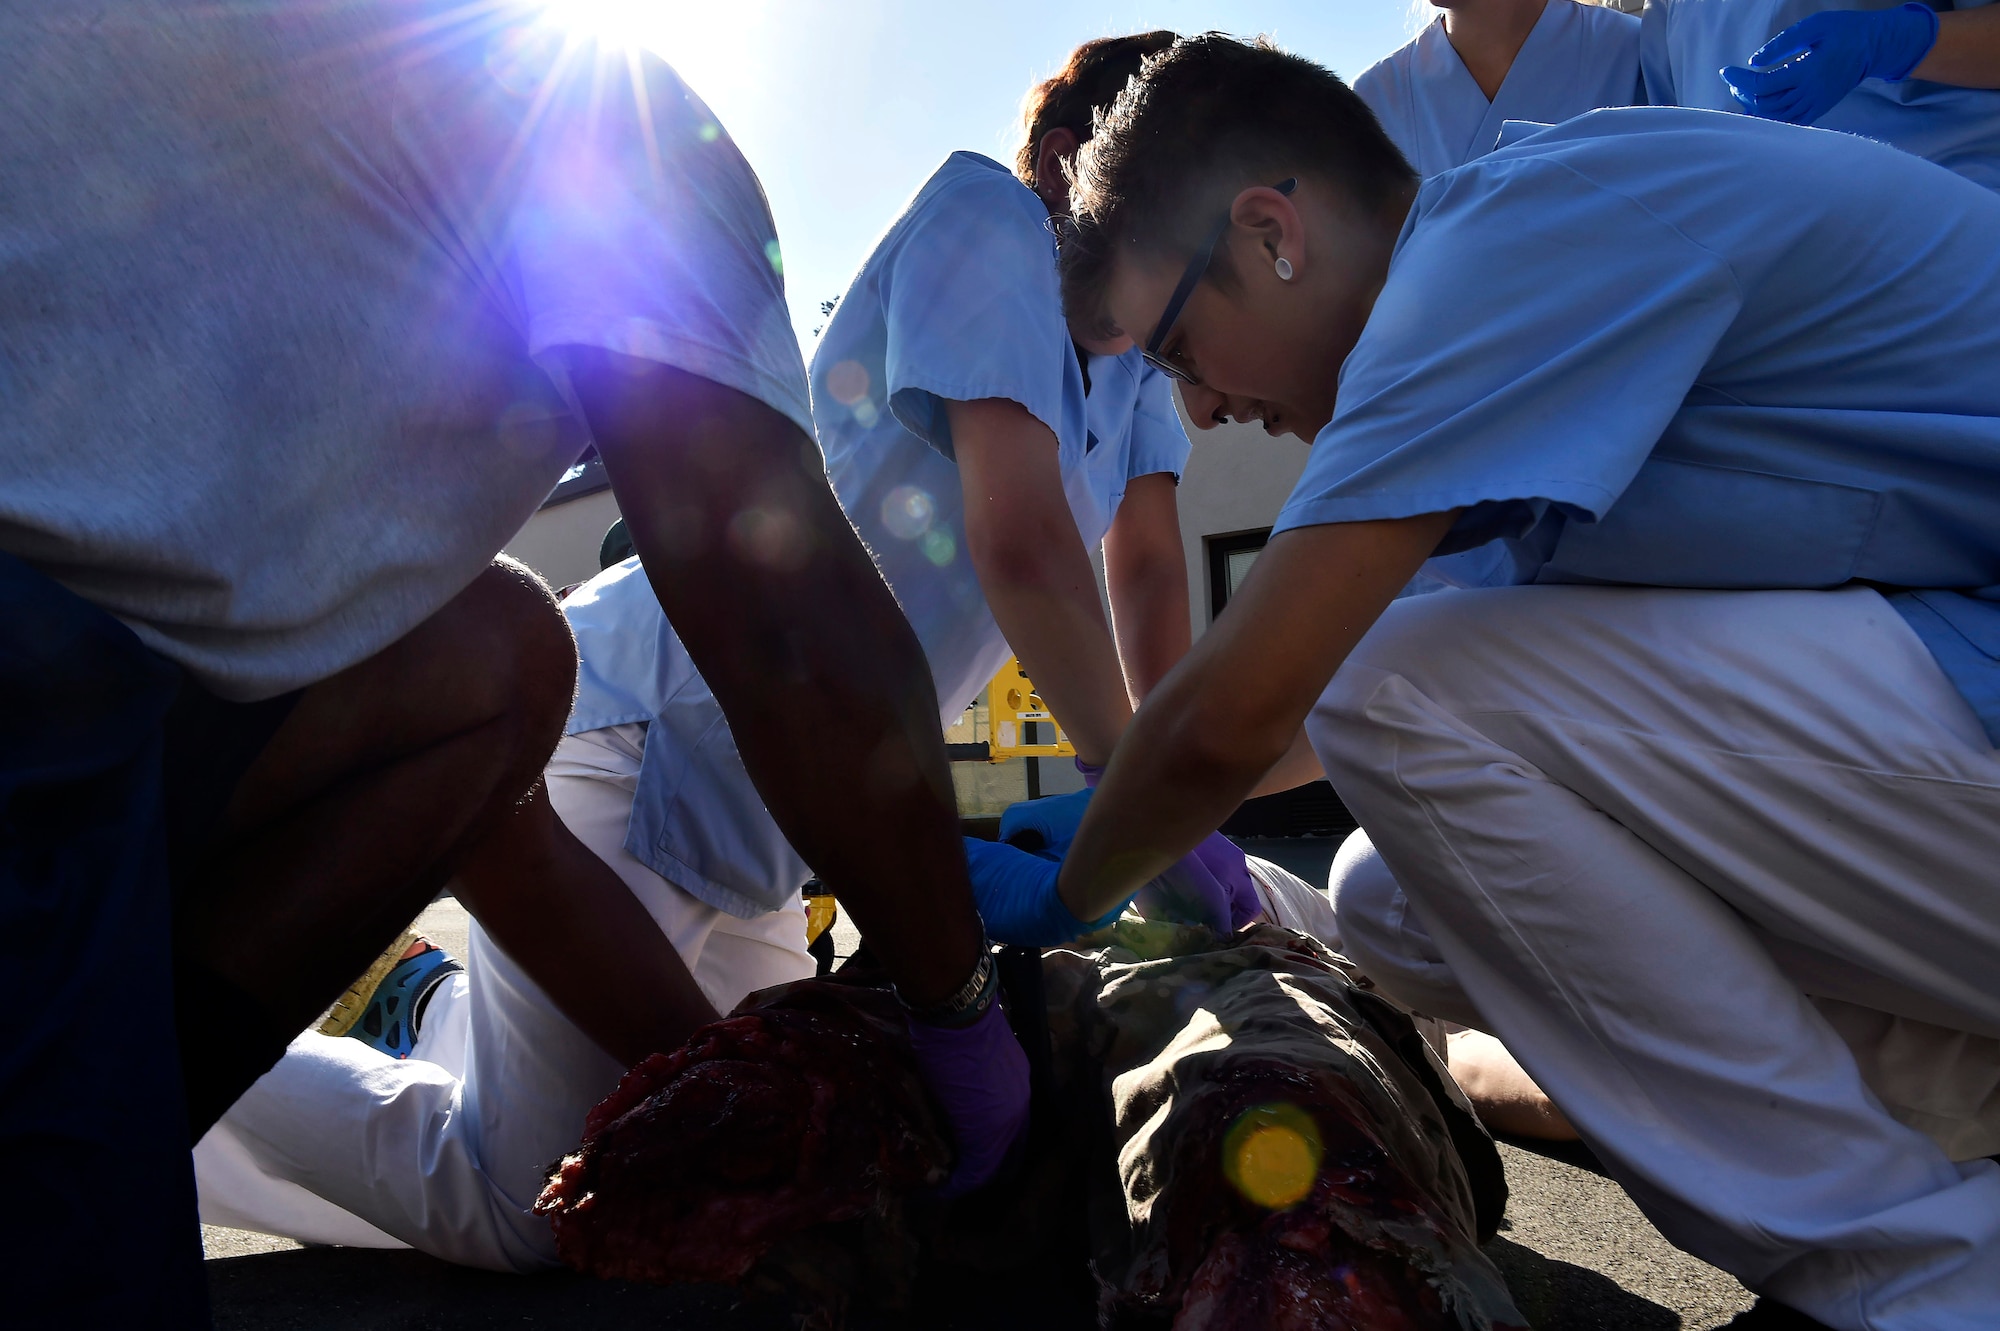 Nursing students from Caritas SchulZentrum St. Hildegard, Saarbrücken, Germany, work with 86th Aeromedical Evacuation Squadron medics in a simulated mass casualty scenario at Ramstein Air Base, Germany, Sept. 13, 2016. The medics and students worked together to triage and treat patients before evacuating them from the scene. (U.S. Air Force photo by Senior Airman Jonathan Bass)